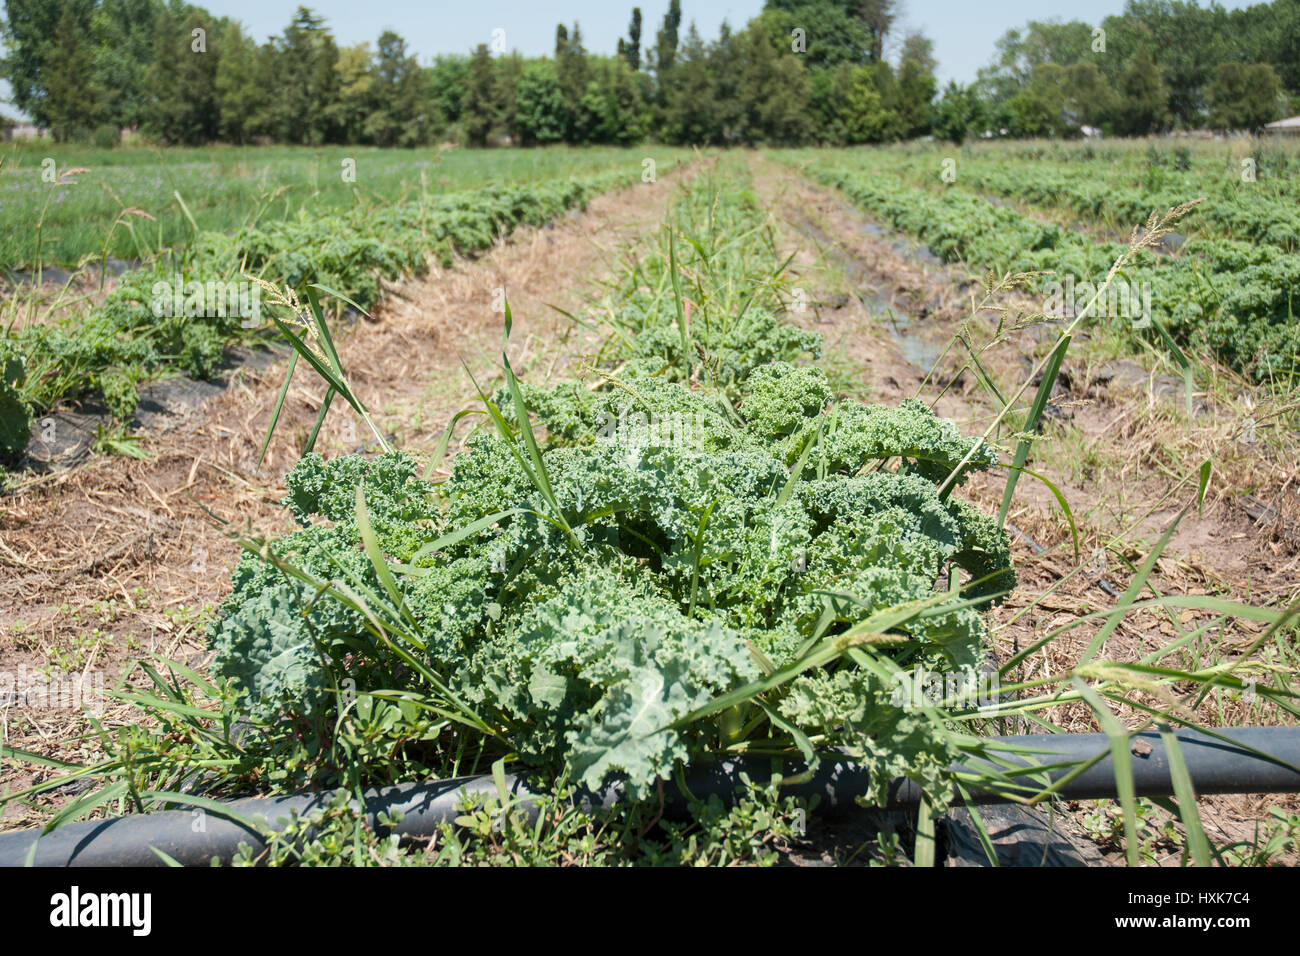 Rows of curly green kale growing in a field Stock Photo